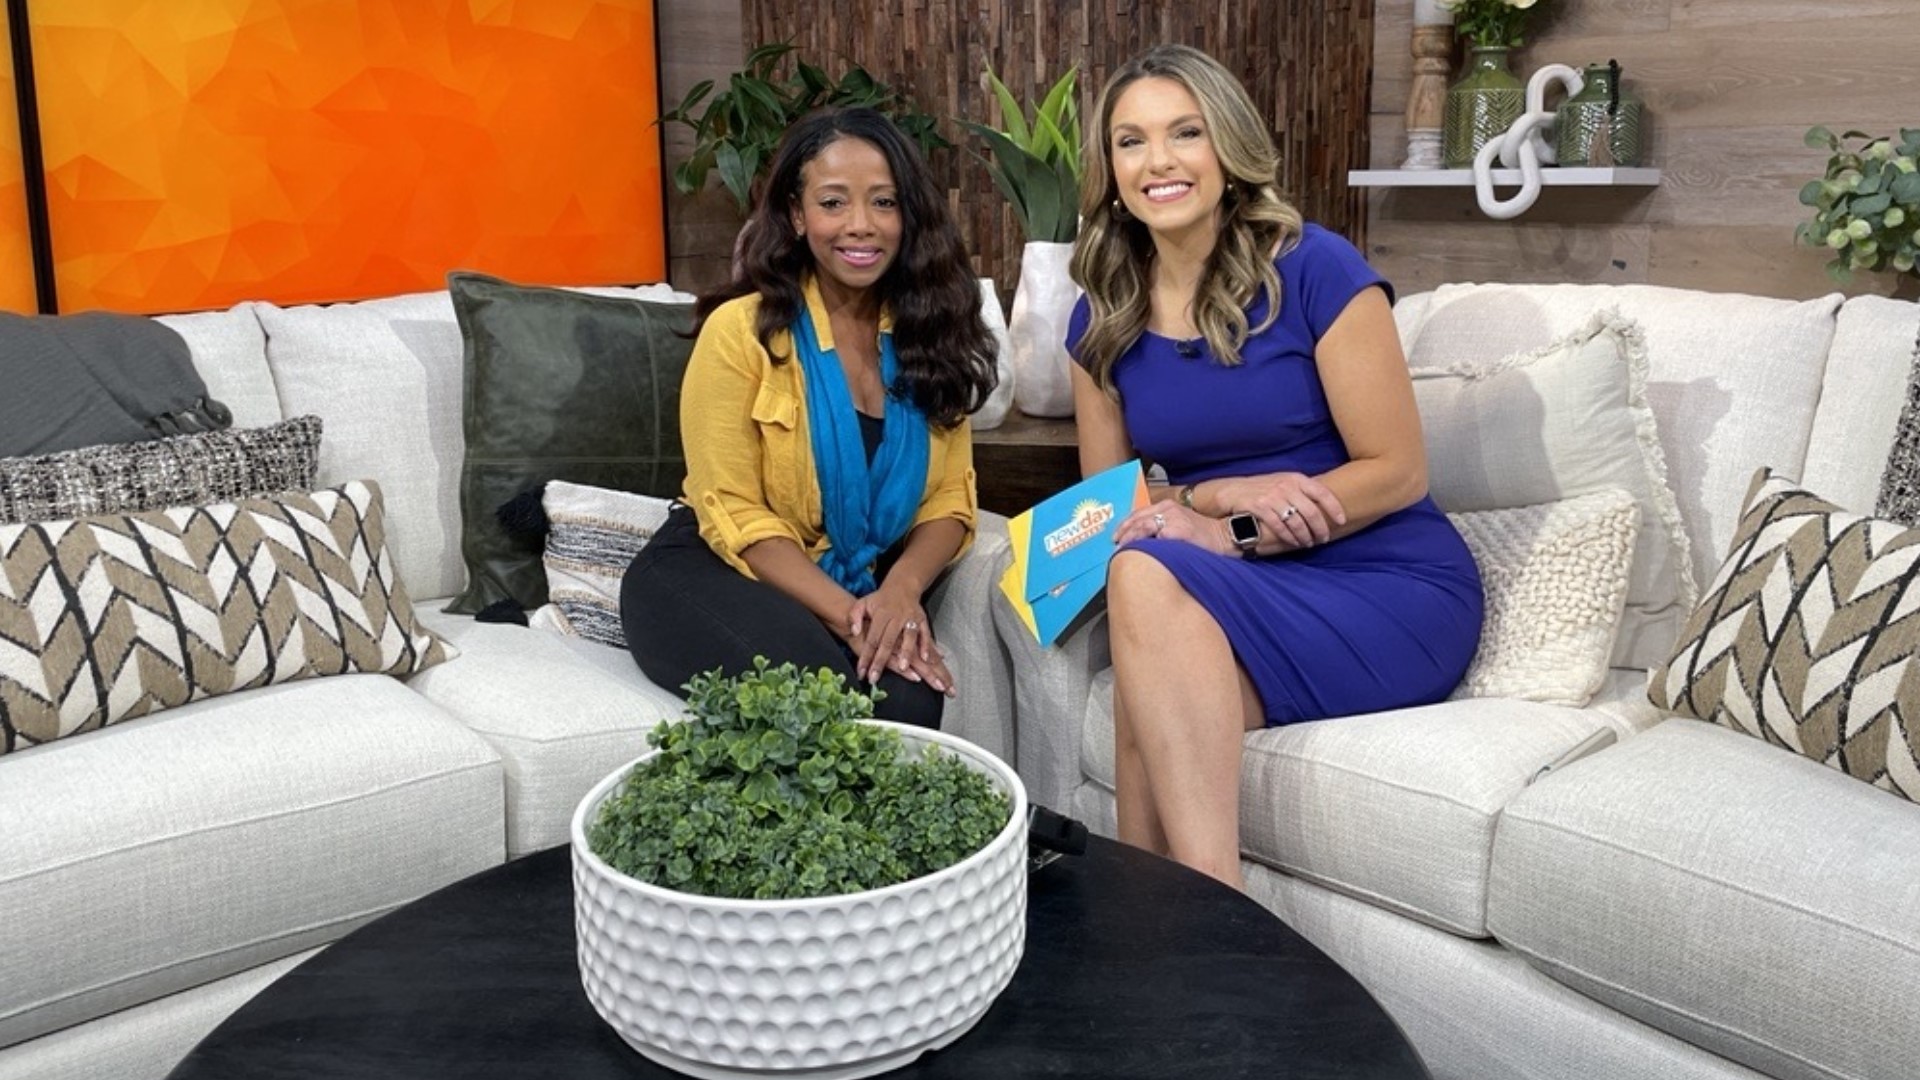 Denella Ri'Chard joined New Day to talk about her new travel show "Traveling with Denella." #newdaynw